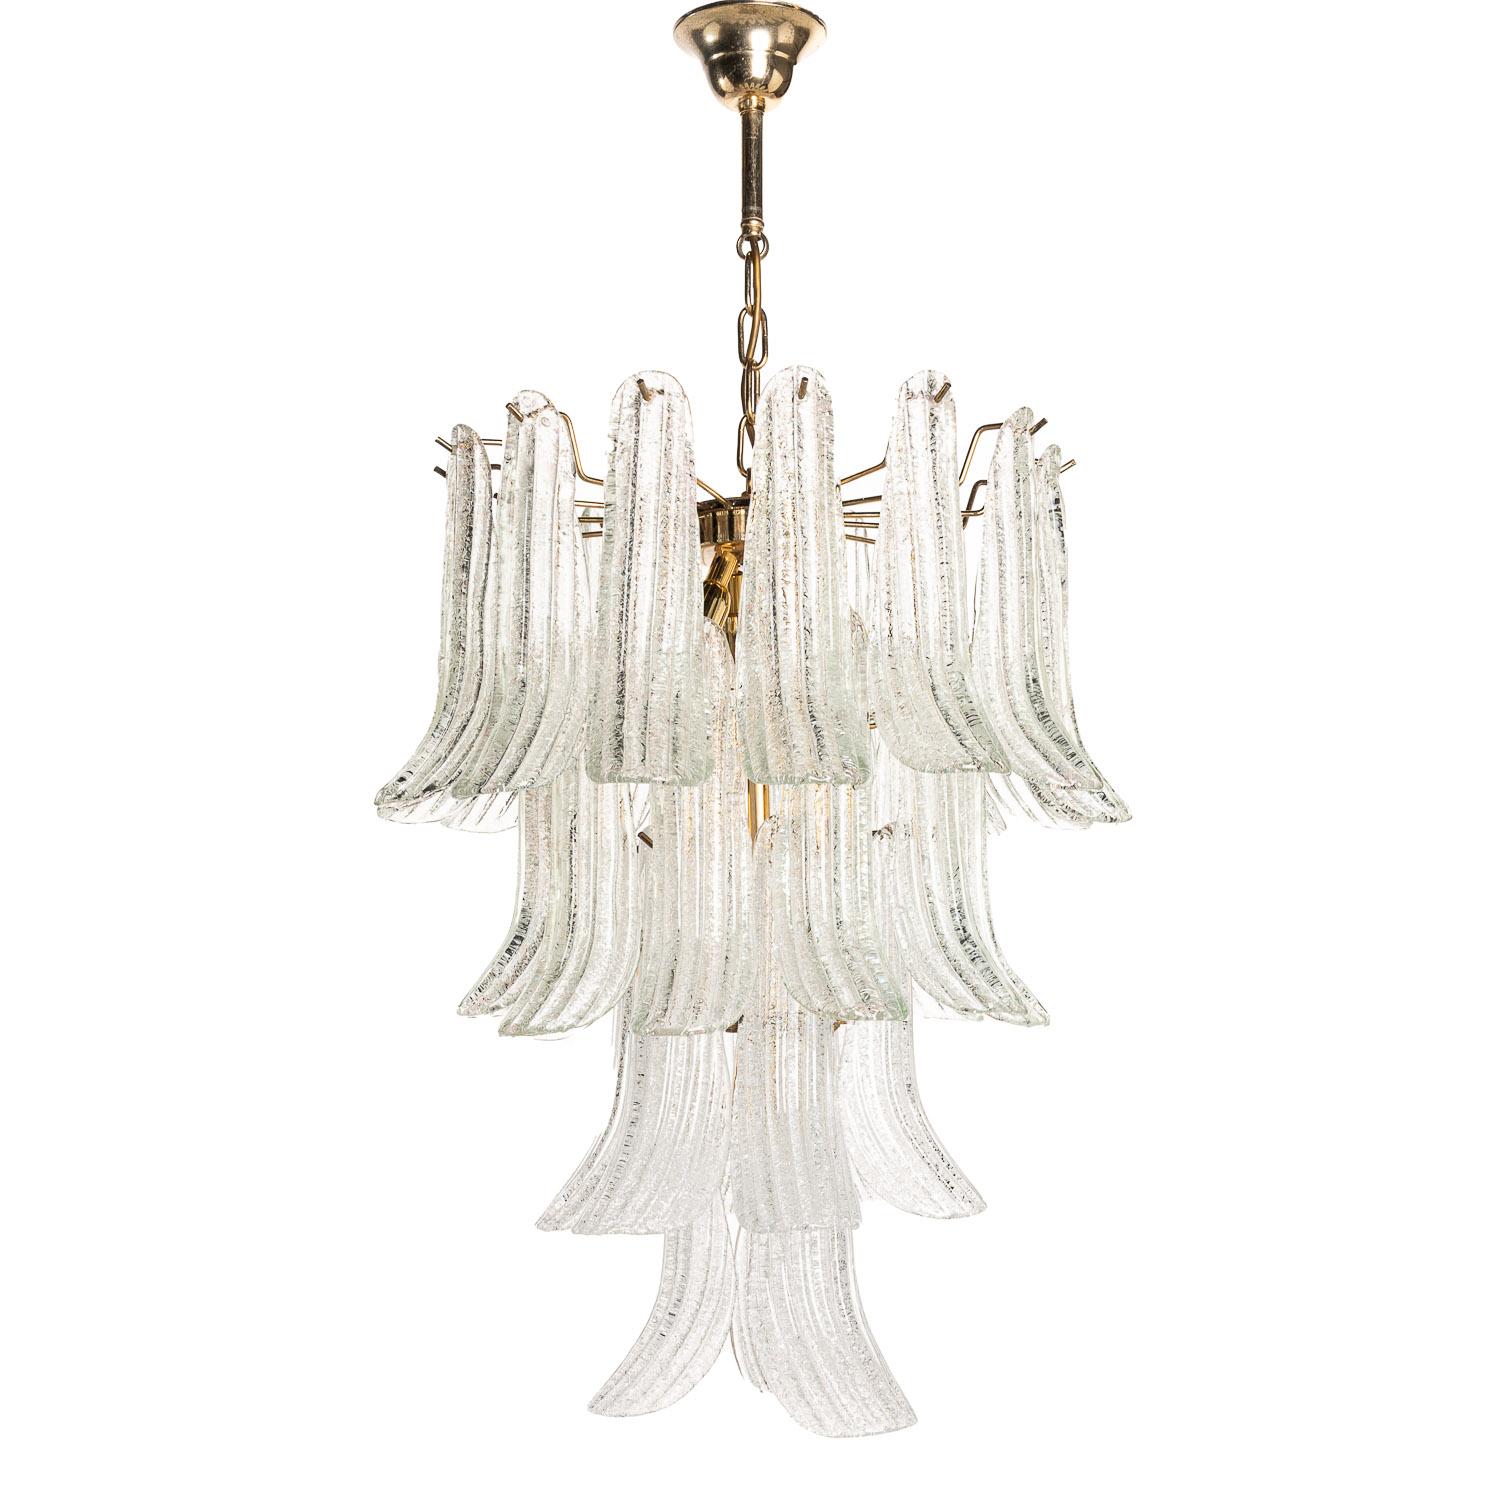 Classic and elegant design. Petal chandelier Inspired by the delicate petals of the Dahlia flower. Hand-blown, Selle Murano glass petals with very small pieces of broken glass merged to the back of the petal. Hanging from a three tier brass frame